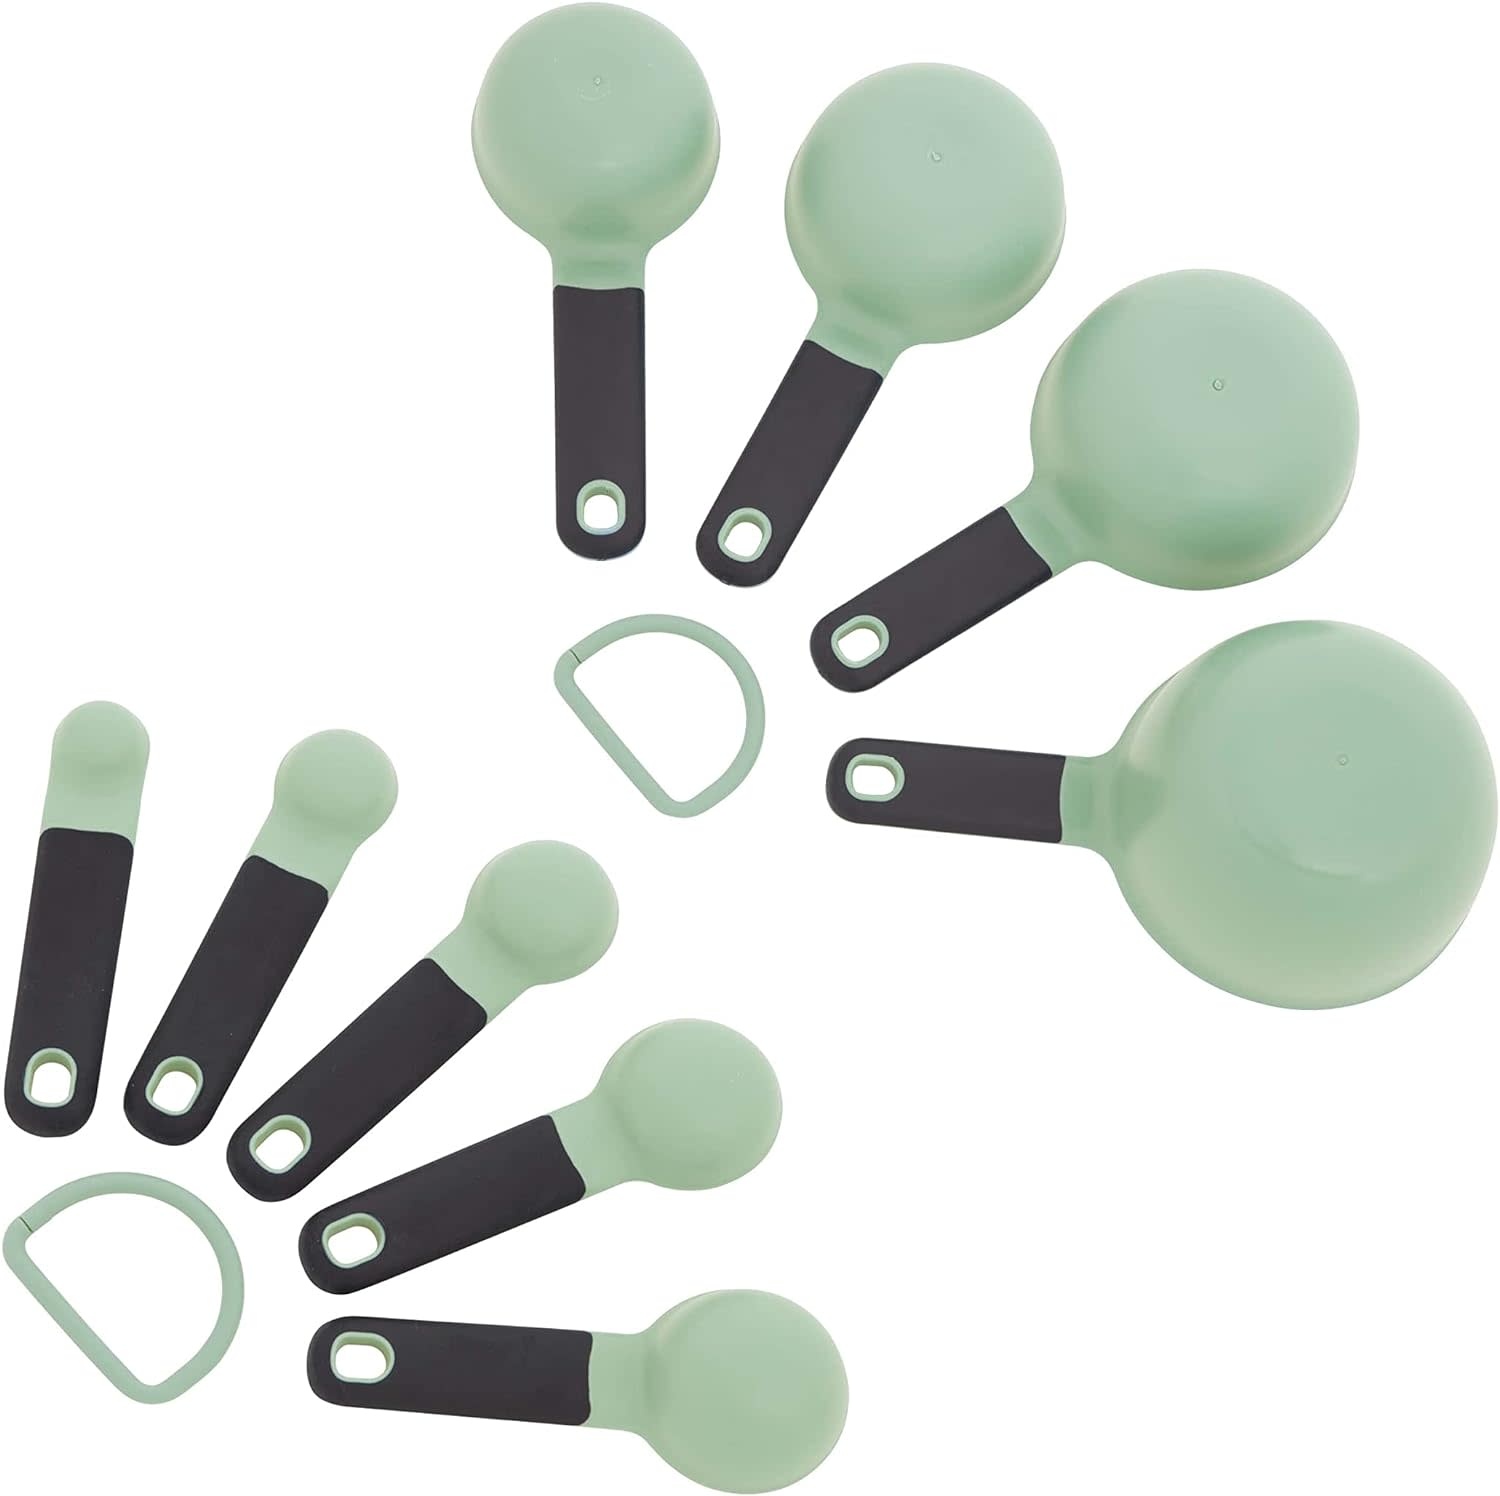 Kitchenaid 9-piece BPA-Free Plastic Measuring Cups and Spoons Set